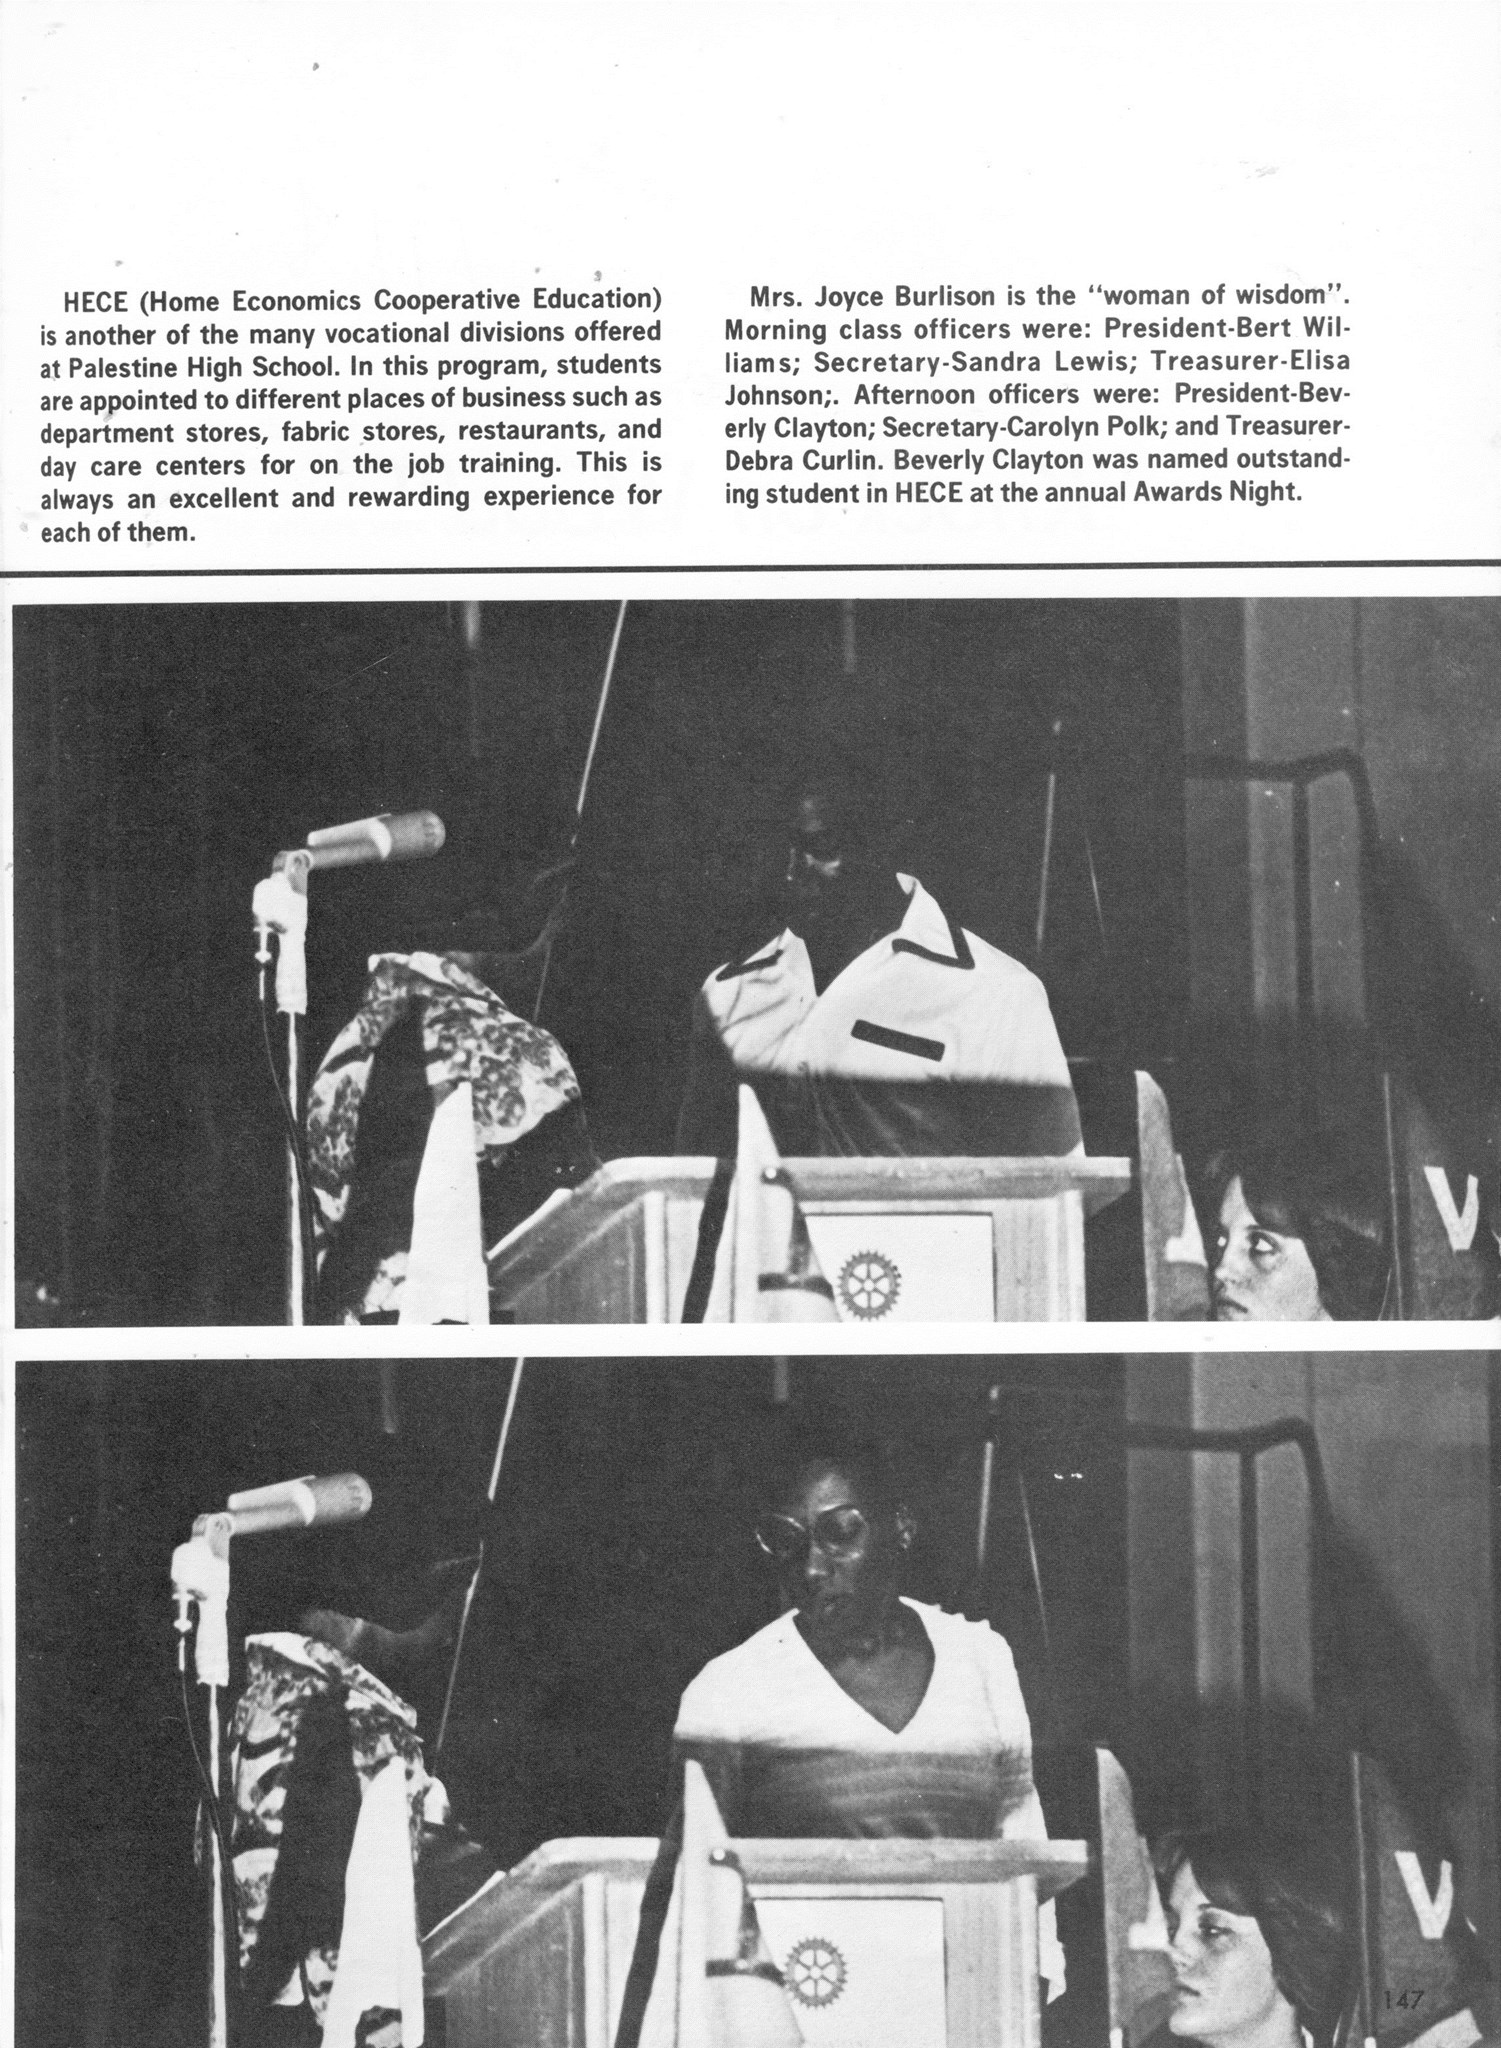 ../../../Images/Large/1980/Arclight-1980-pg0147.jpg